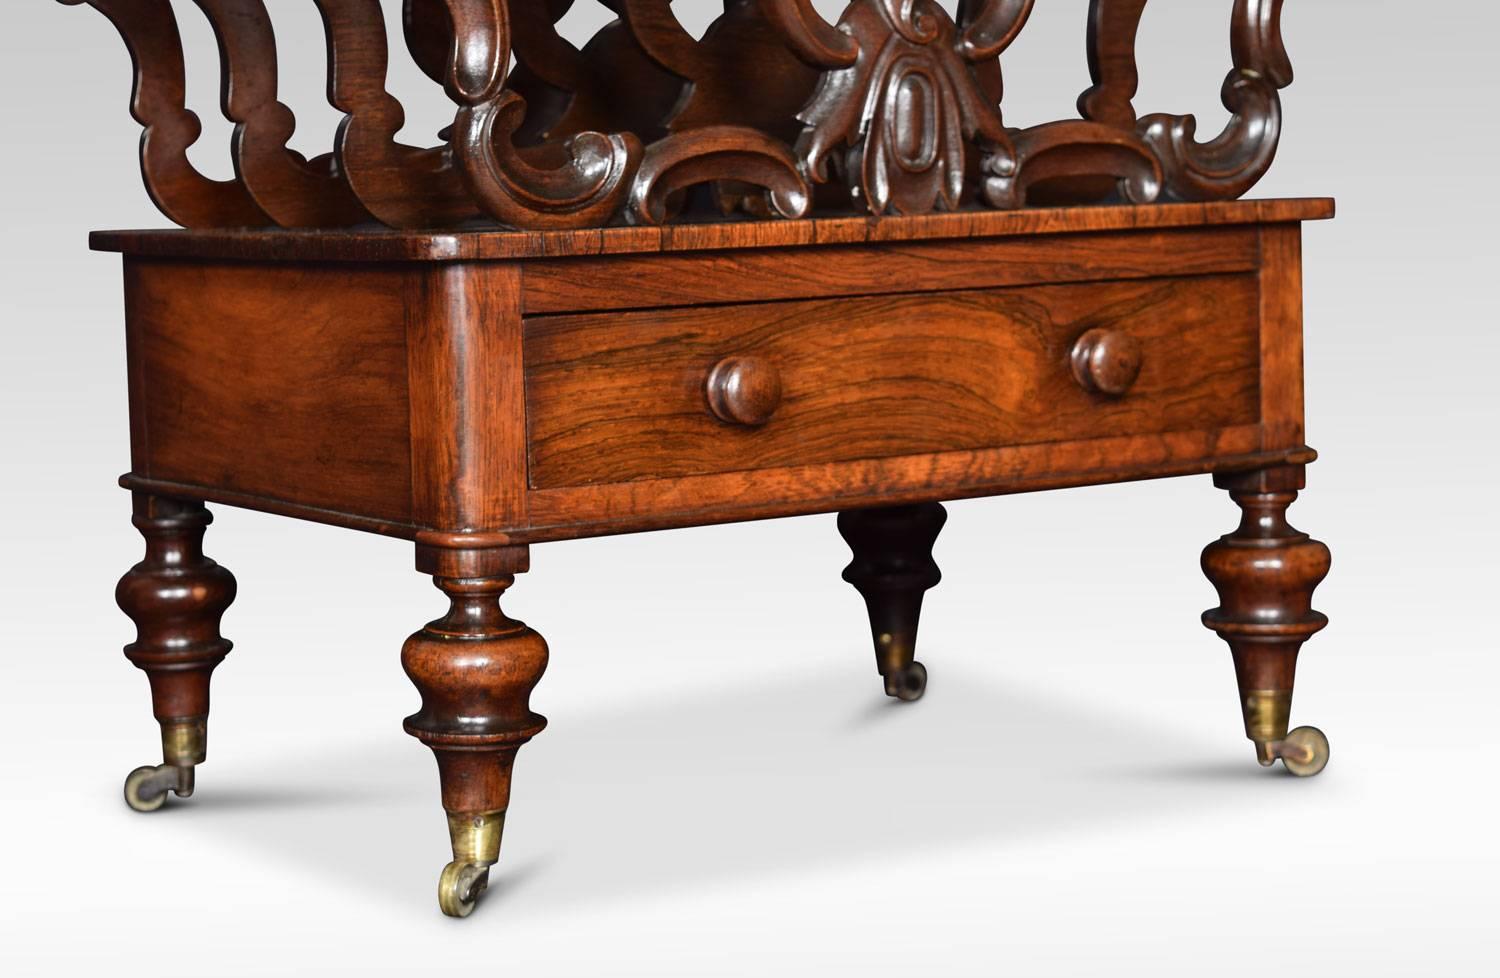 Early Victorian Canterbury, having three divisions with ‘C’ scroll and foliate uprights. Above a single drawer with turned handles. All raised up on four turned legs with brass caps and castors
Dimensions:
Height 21 inches
Width 21.5 inches
Depth 15